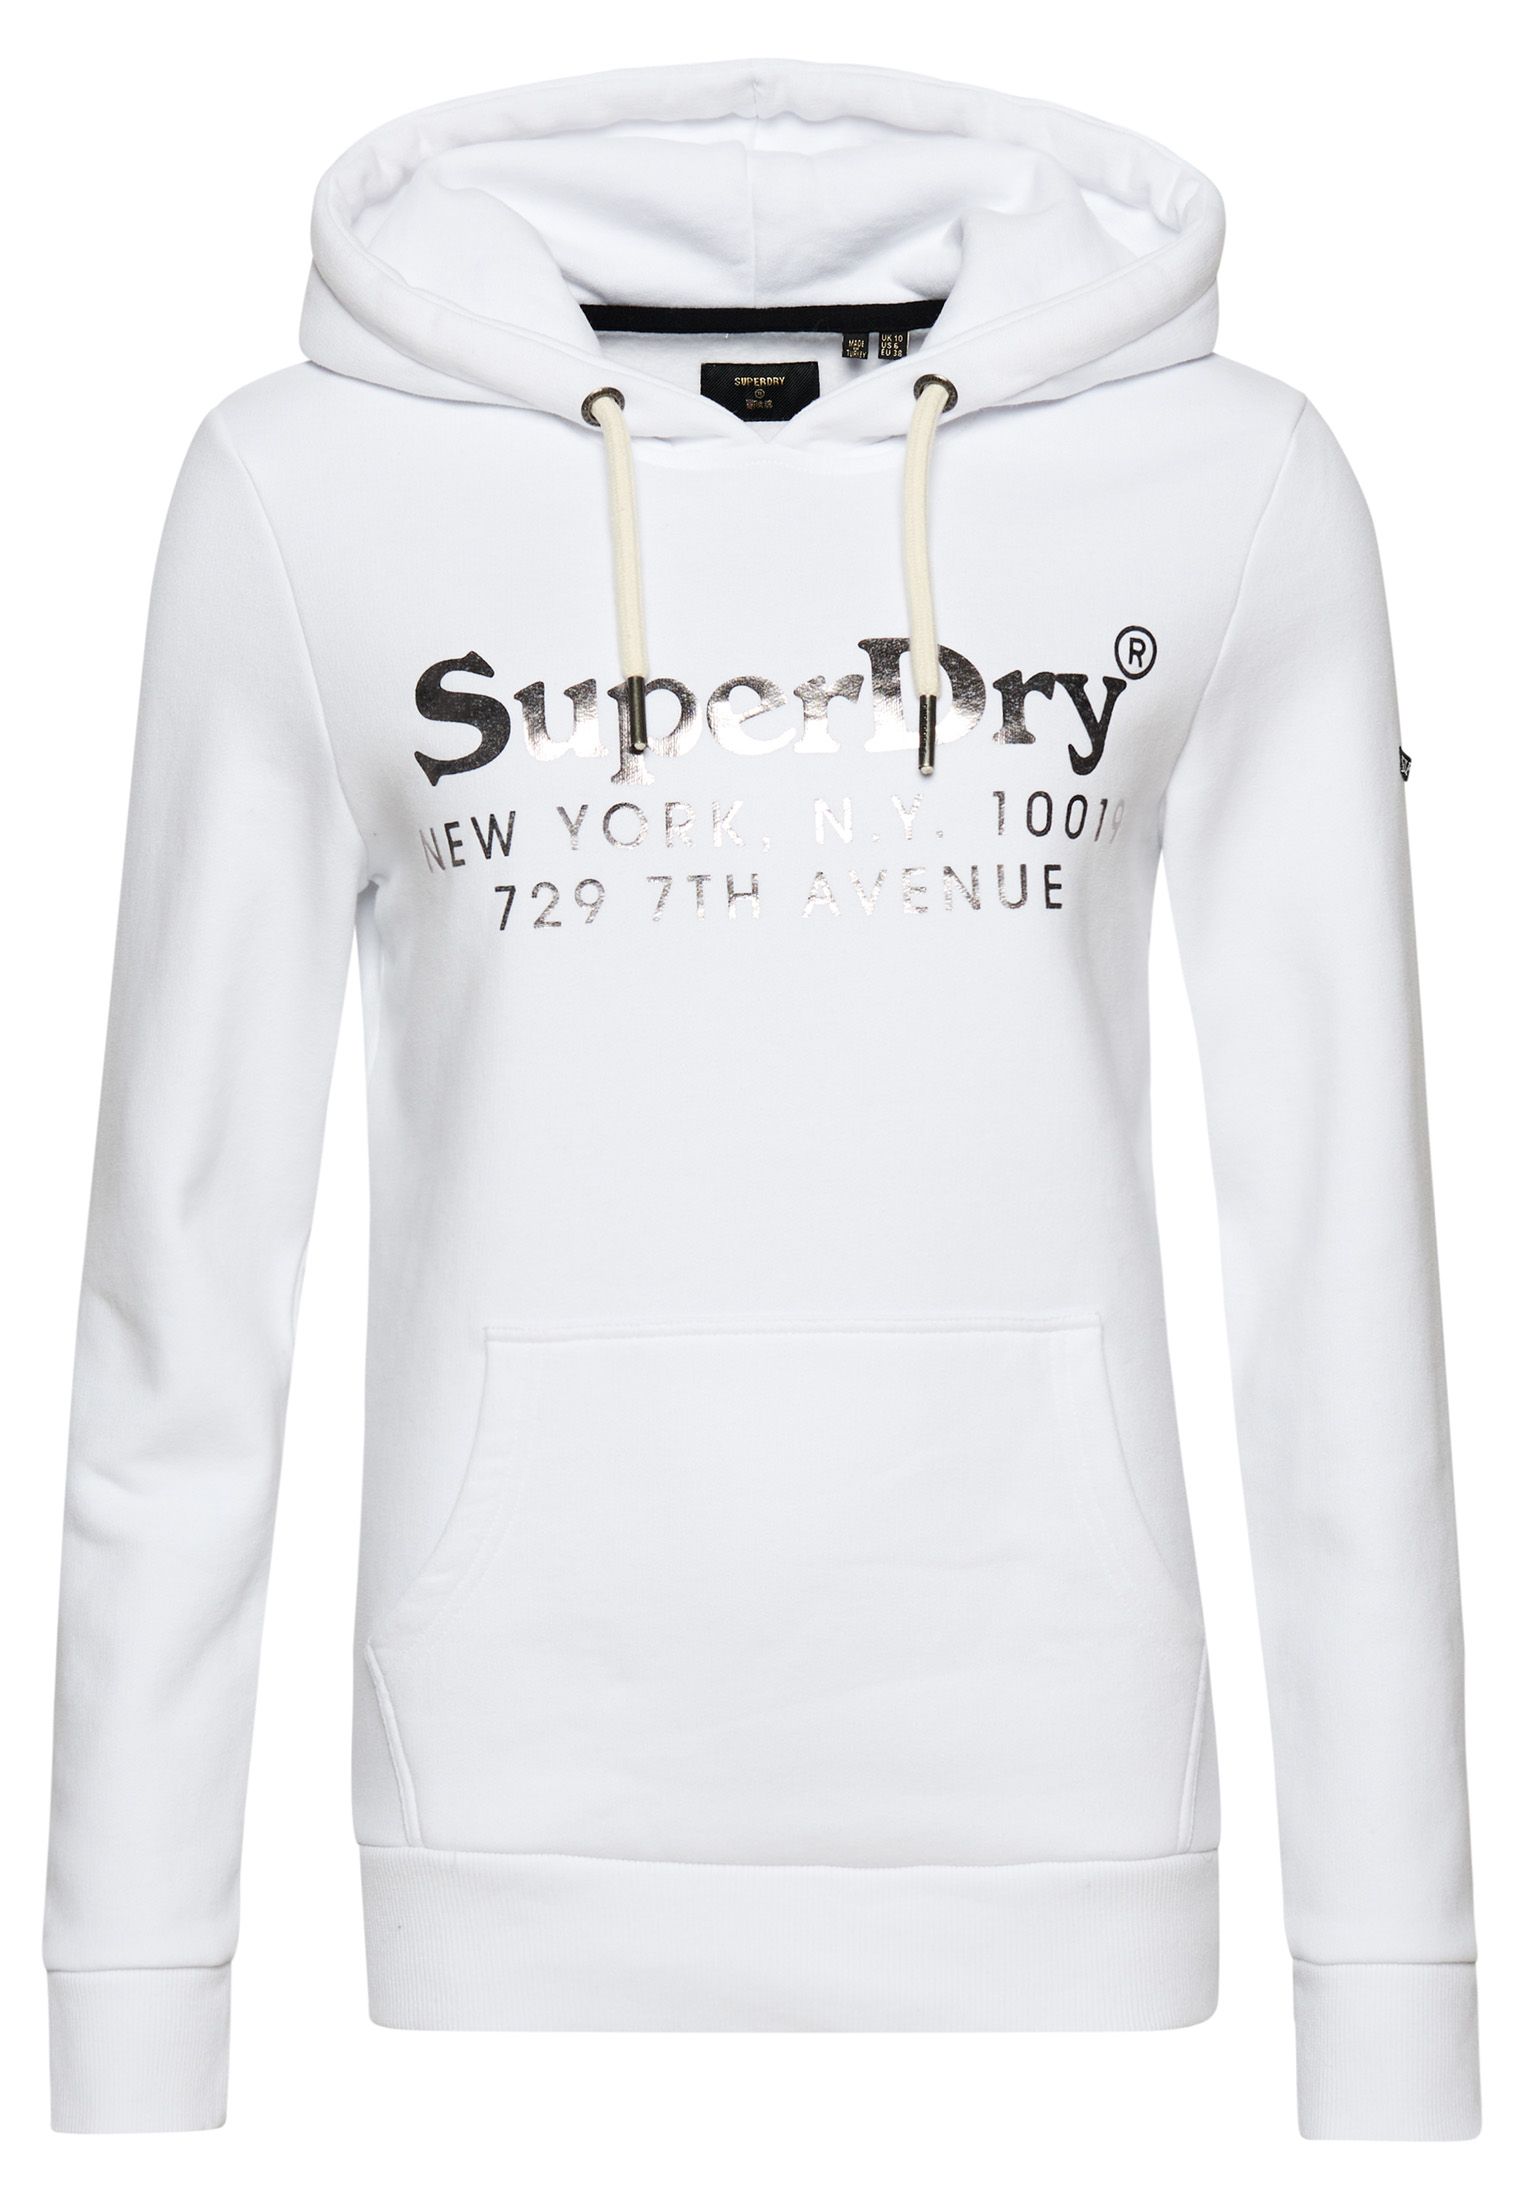 We love to tap into those old-school vibes when it comes to our vintage range, utilising names and locations that evoke nostalgia for the past. In particular, New York City inspires us through the stories of its workmen and rich, unique culture. When you rock this classic hoodie with its signature softness, you'll also be representing our Superdry family in a retro style.Relaxed fit – the classic Superdry fit. Not too slim, not too loose, just right. Go for your normal sizeDrawcord hoodLong sleevesPrinted graphic and logoRibbed cuffs and hemFront pouch pocketSignature Superdry tab